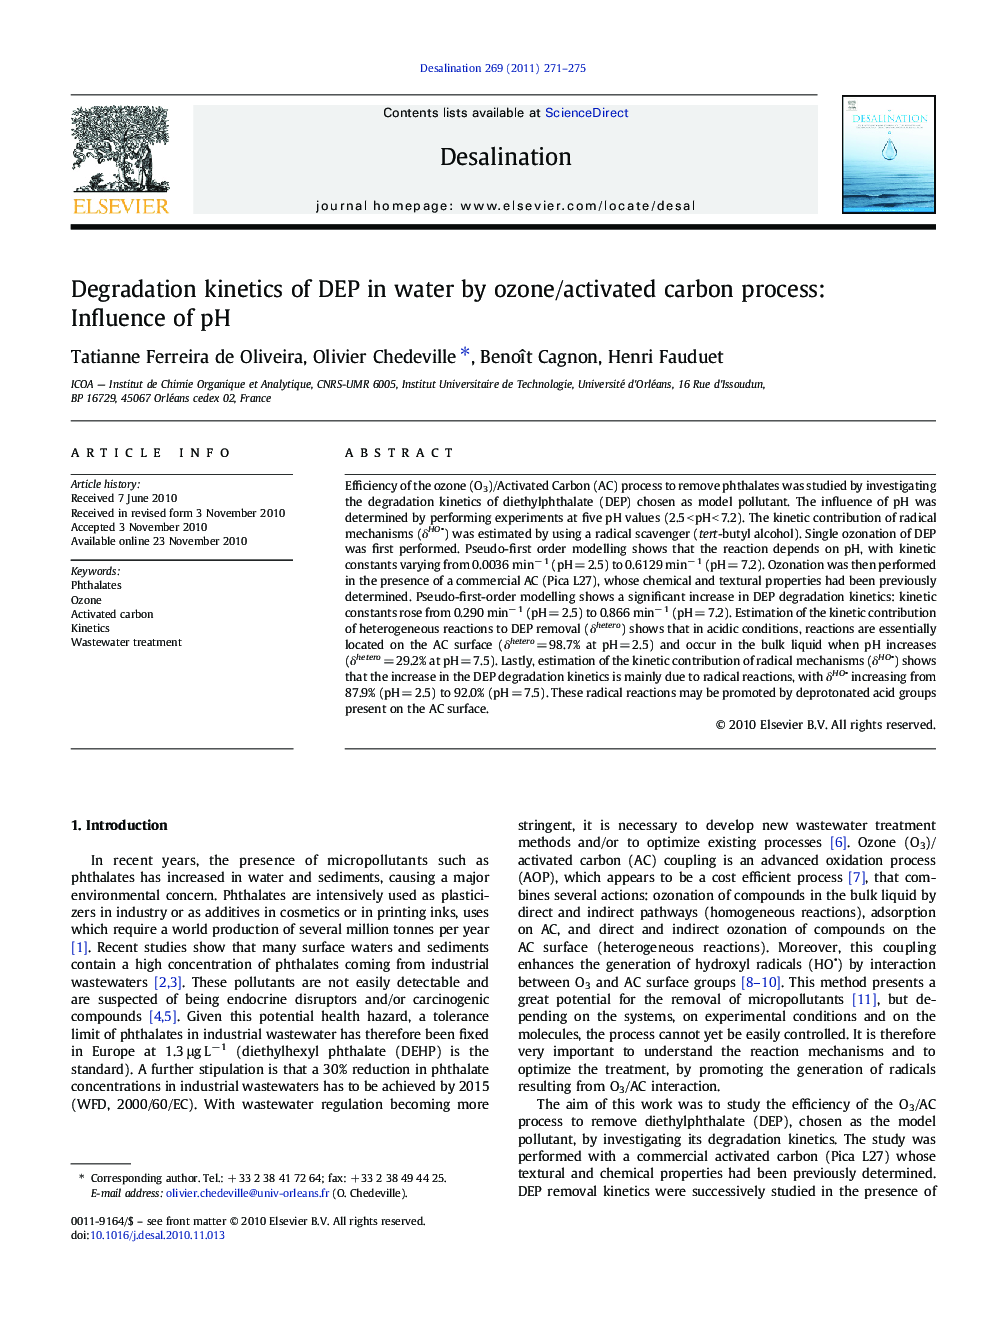 Degradation kinetics of DEP in water by ozone/activated carbon process: Influence of pH